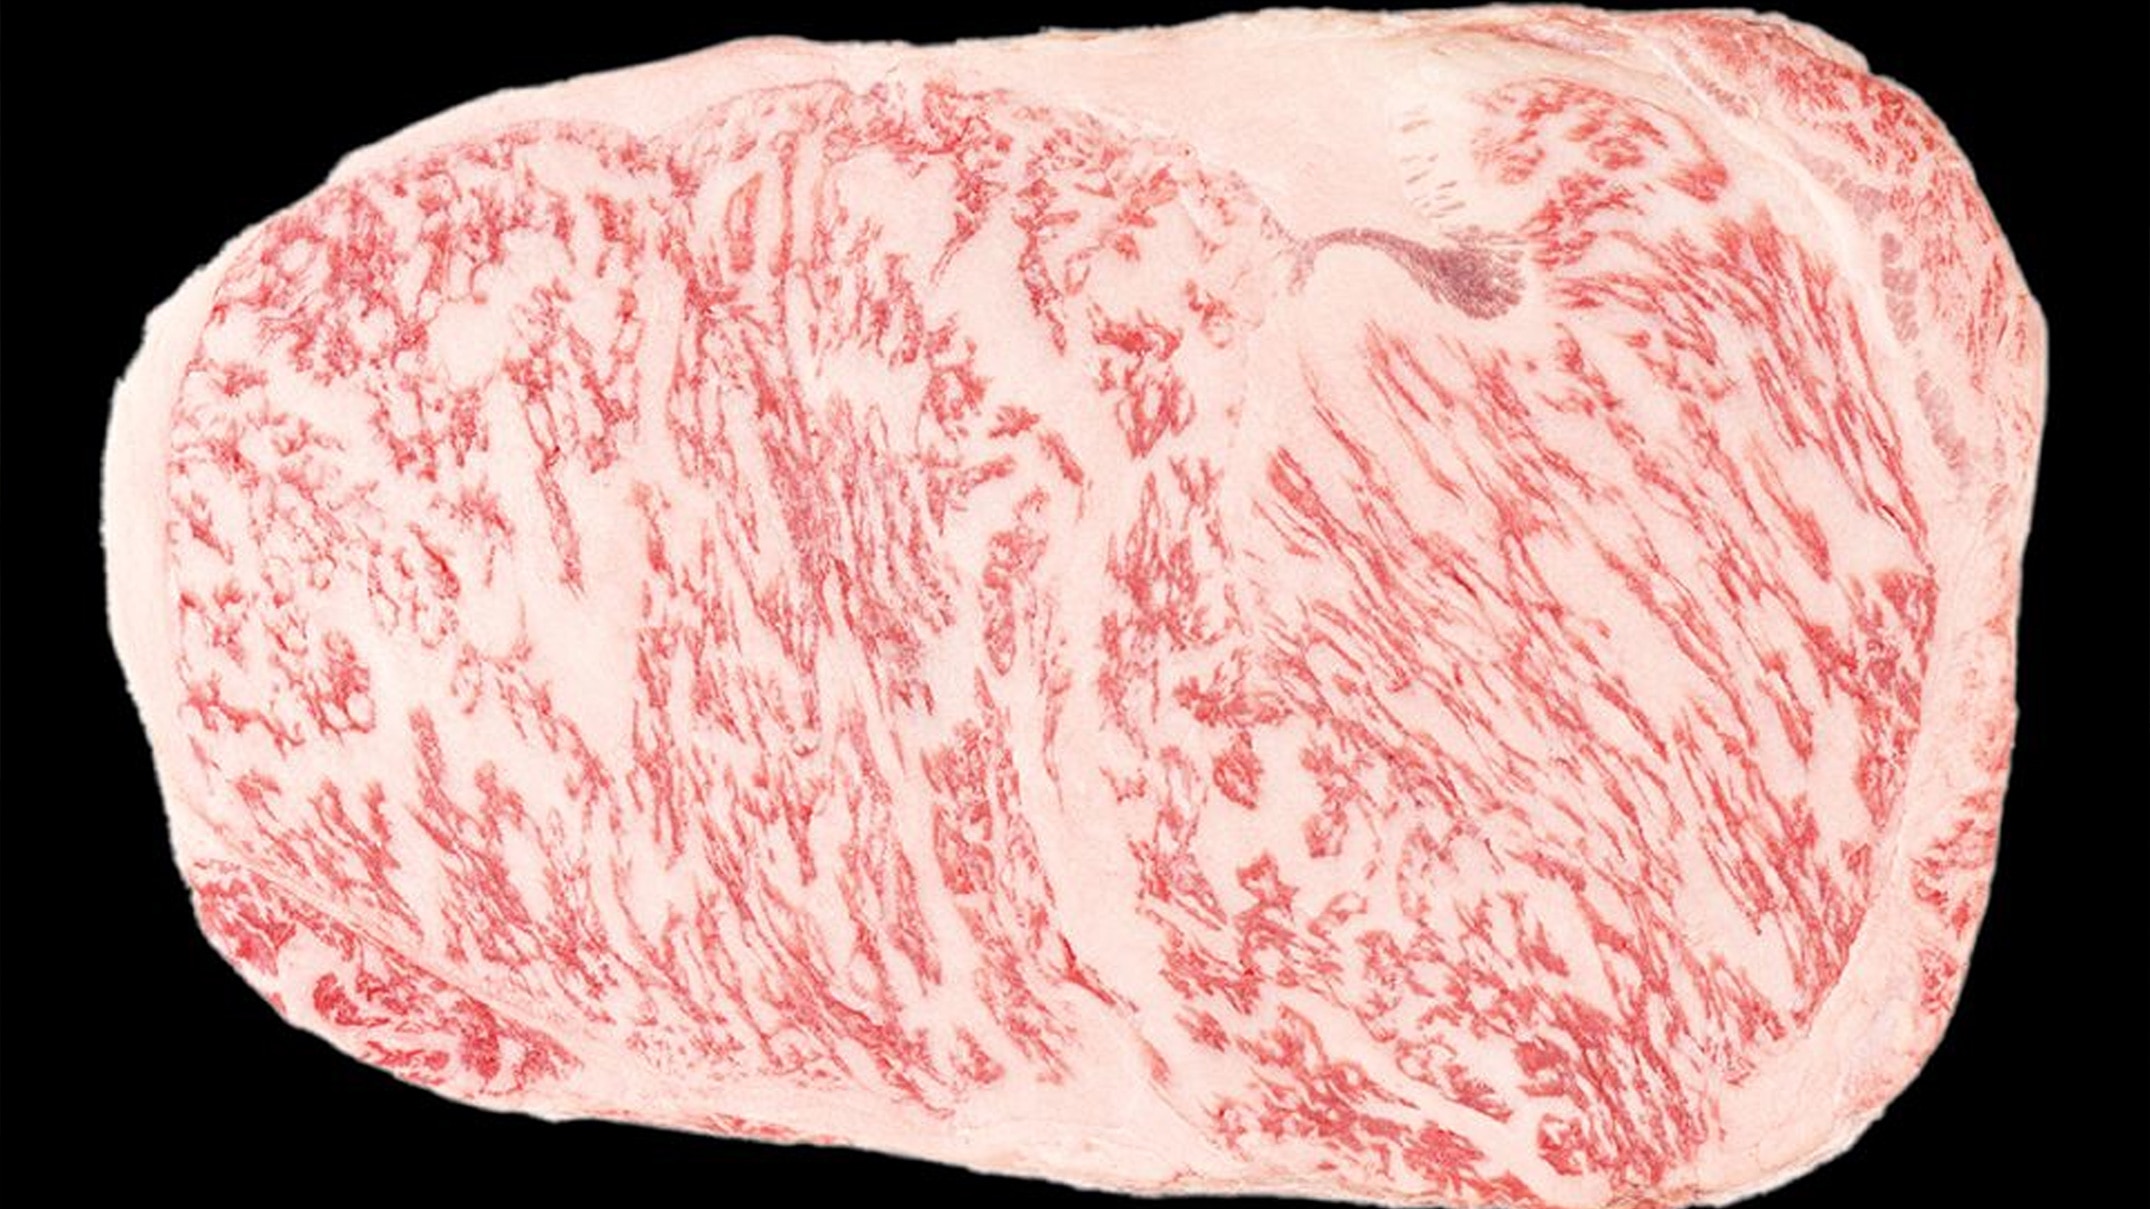 mayura station's wagyu steak with 60 per cent marbling crowned grand champion